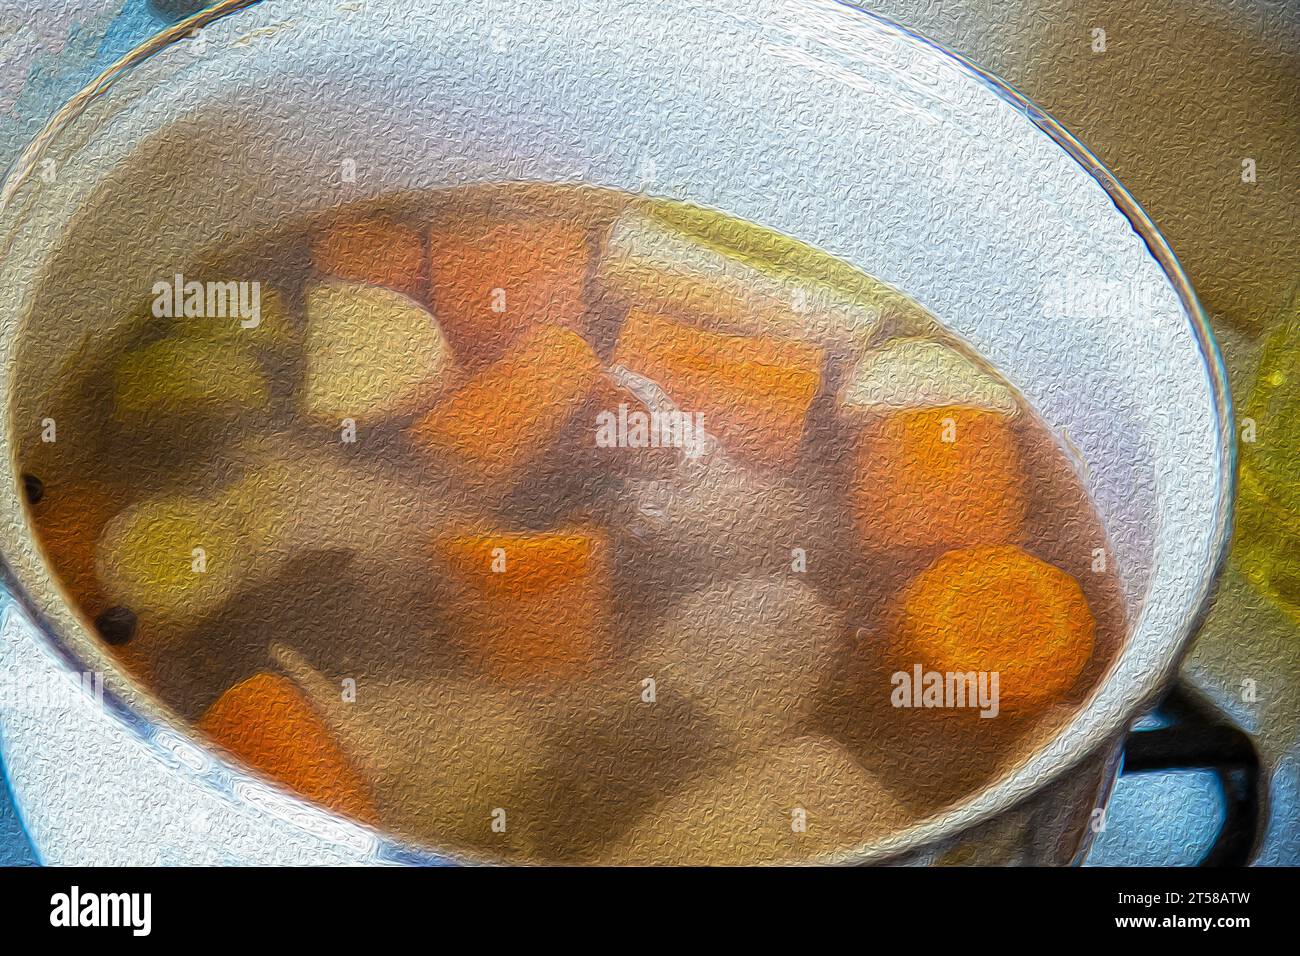 Cooking broth soup with chicken pieces and vegetables in pot, image with oil paint effect Stock Photo